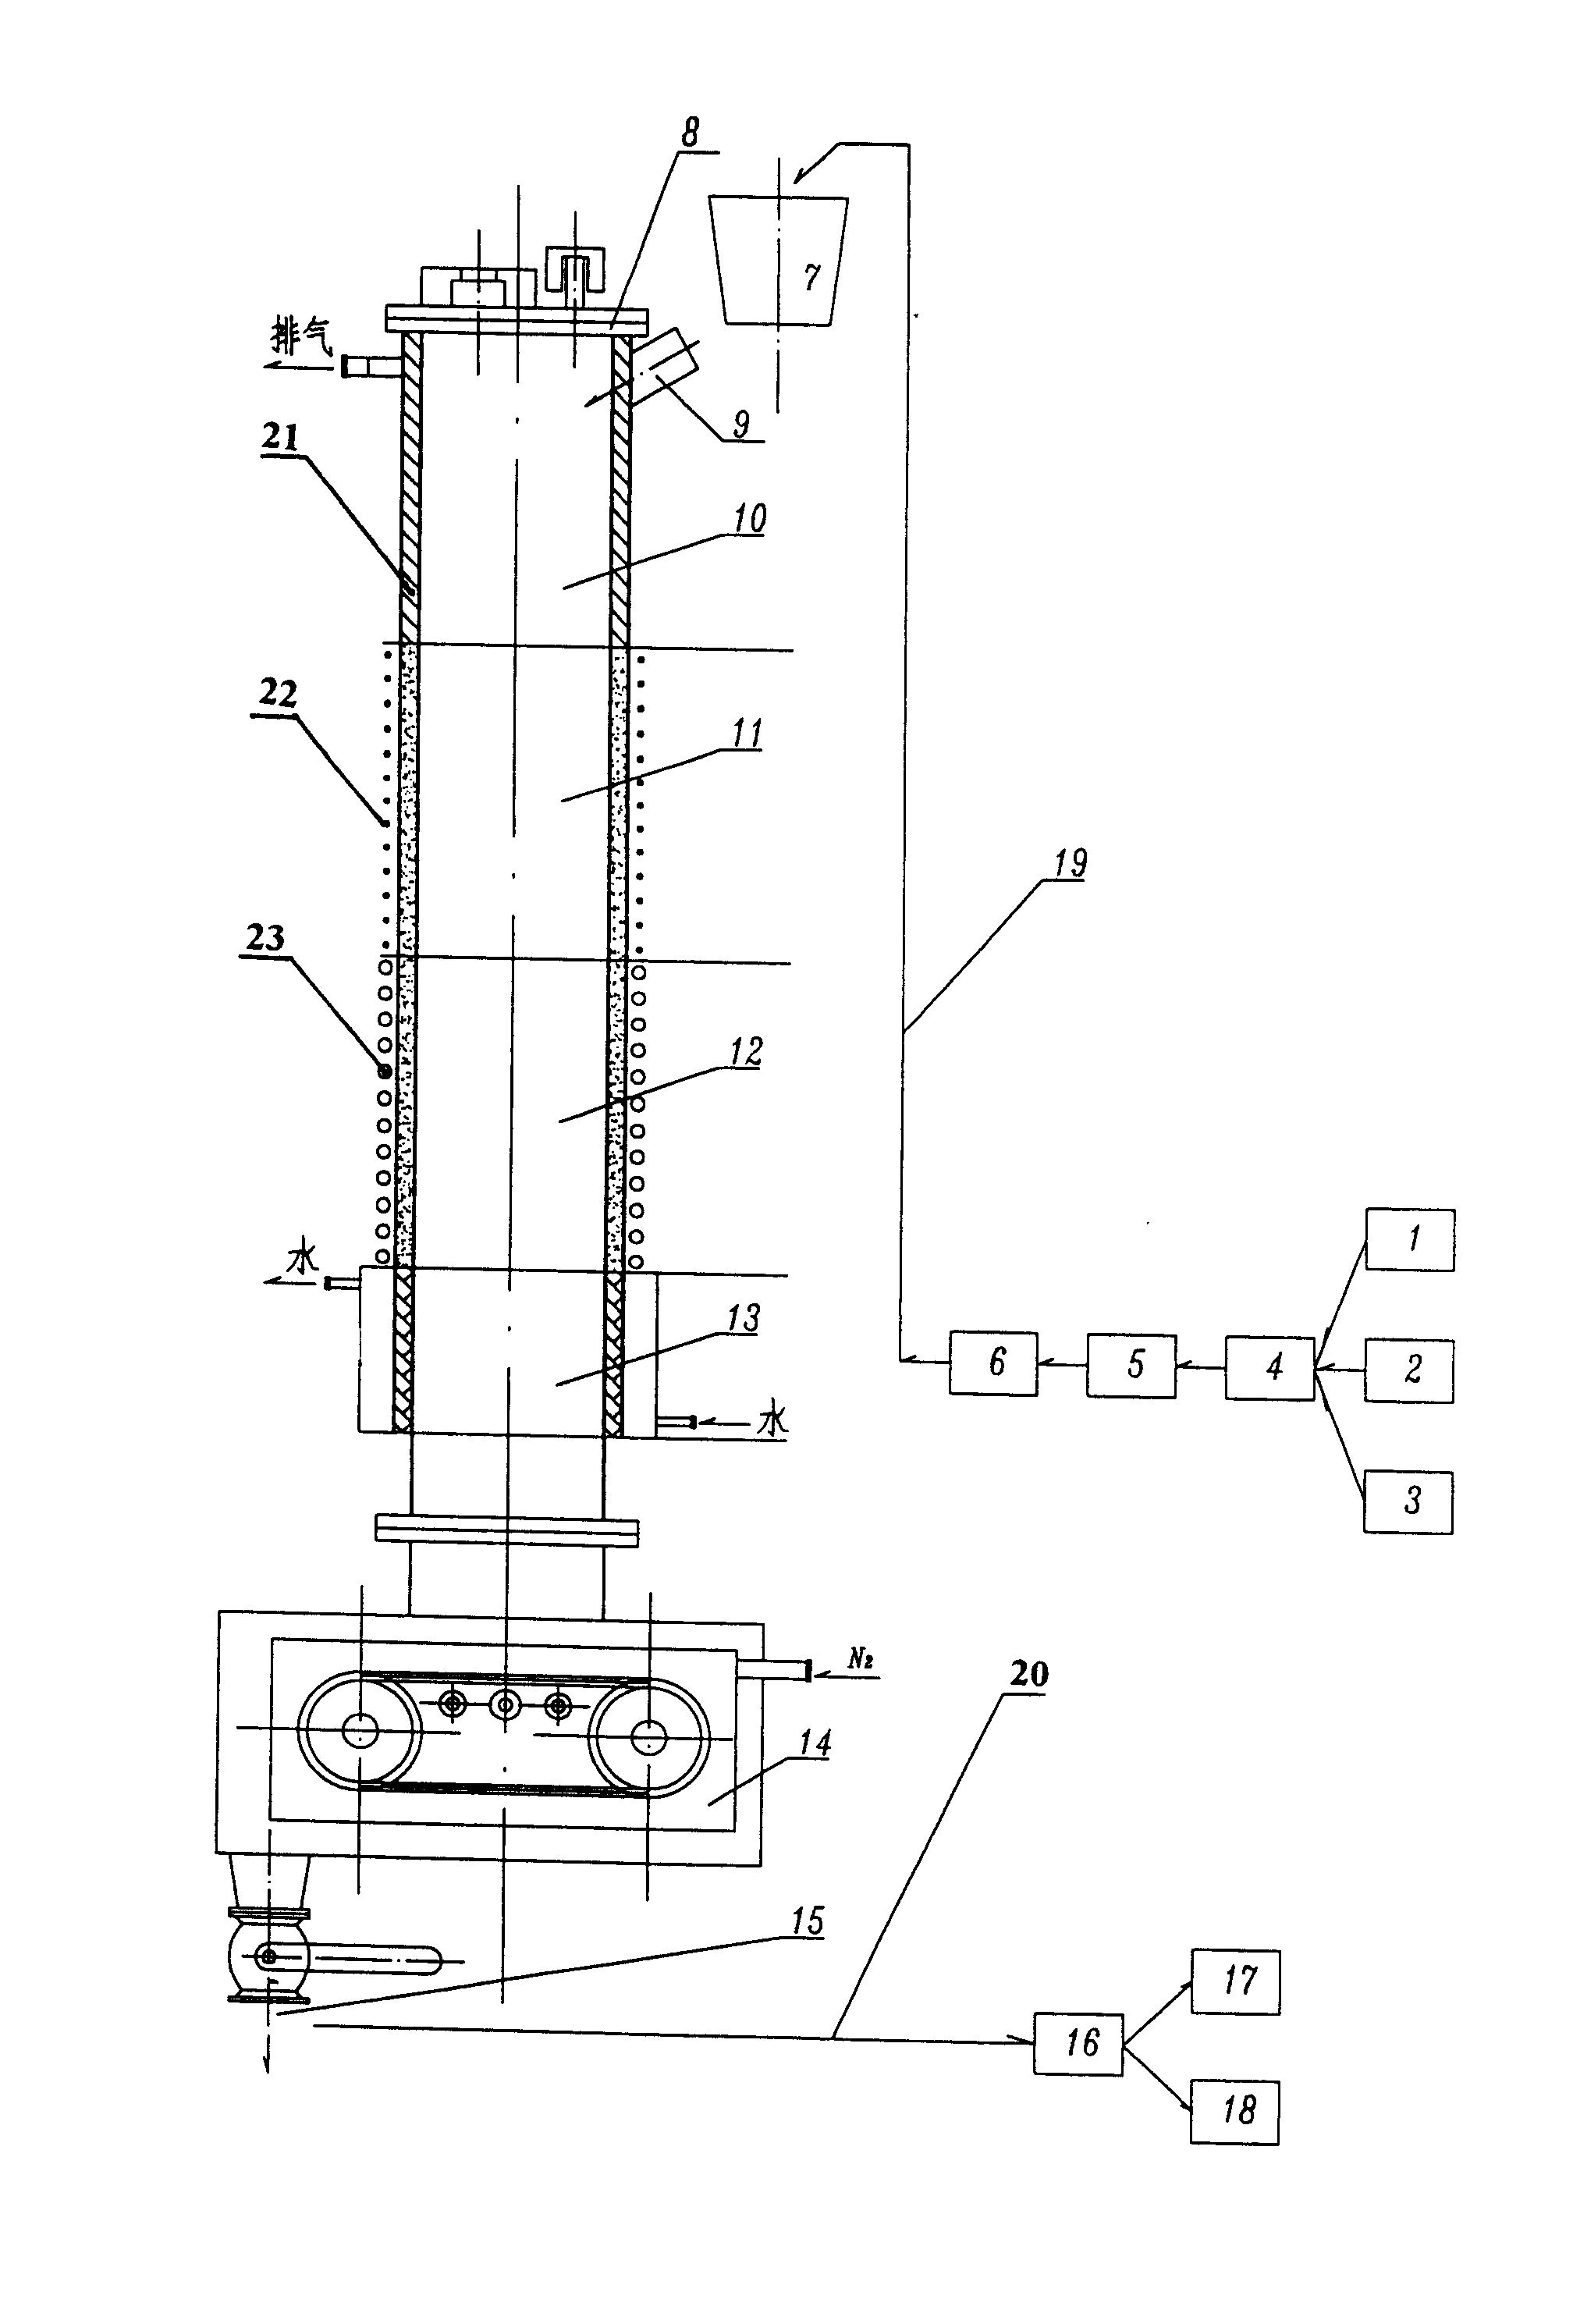 Process and device for continuous production of vanadium nitride alloy